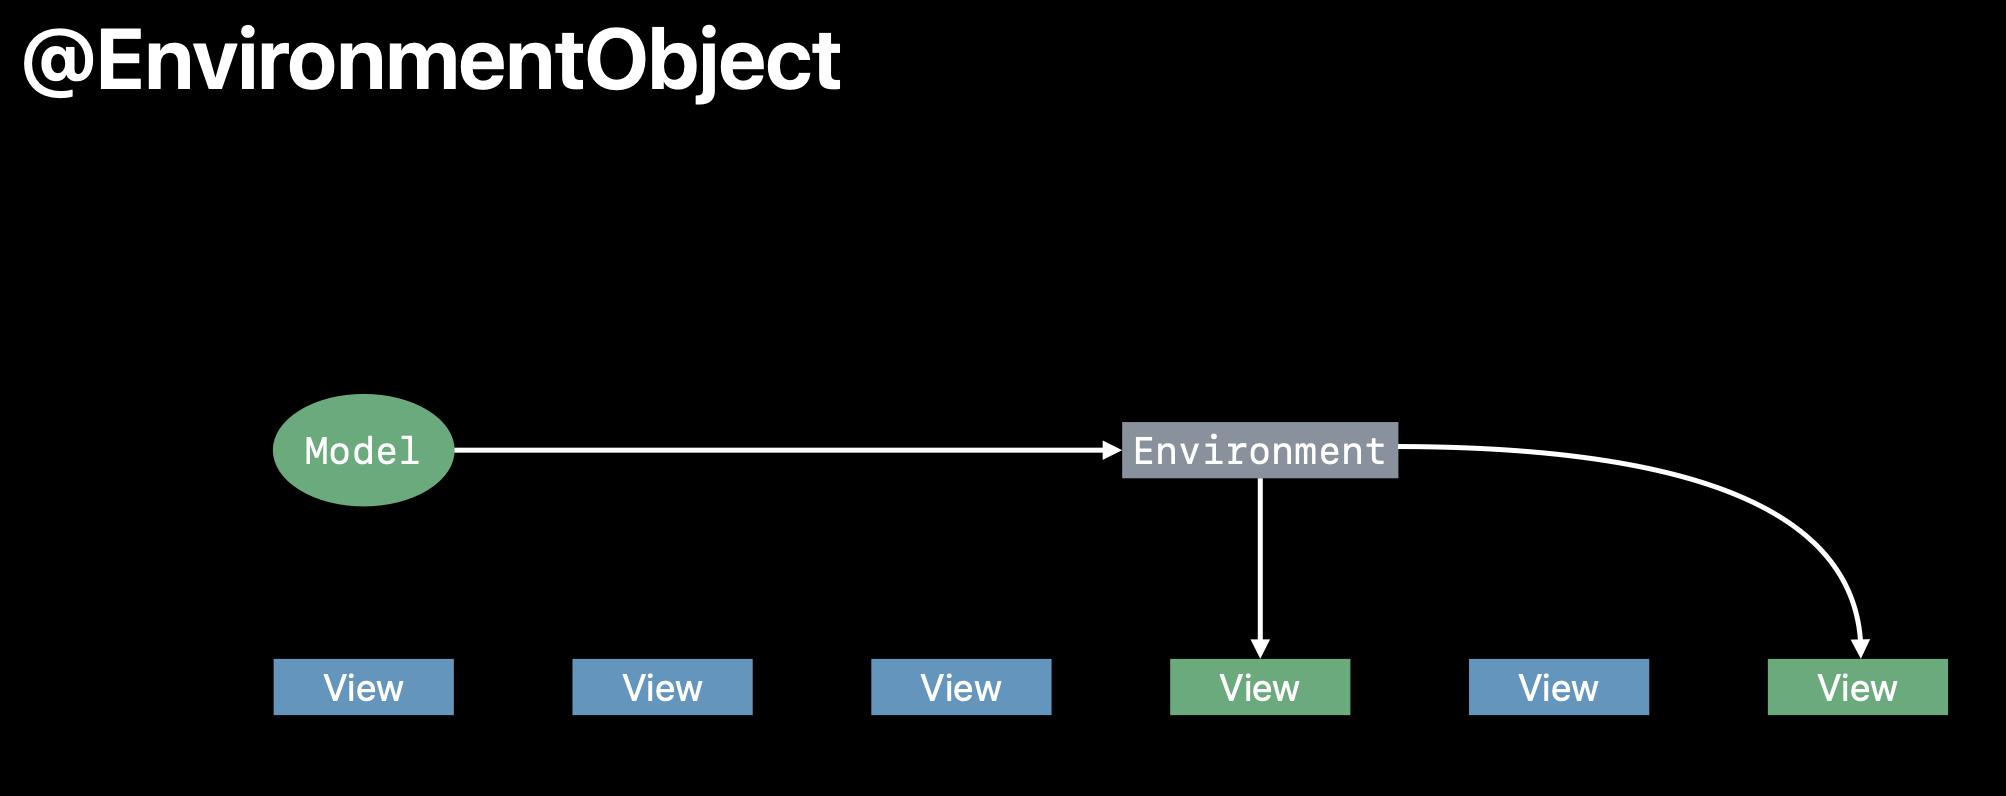 QEnvironmentObject injection view hierarchy example slide from WWDC19' by Raj Ramamurthy.